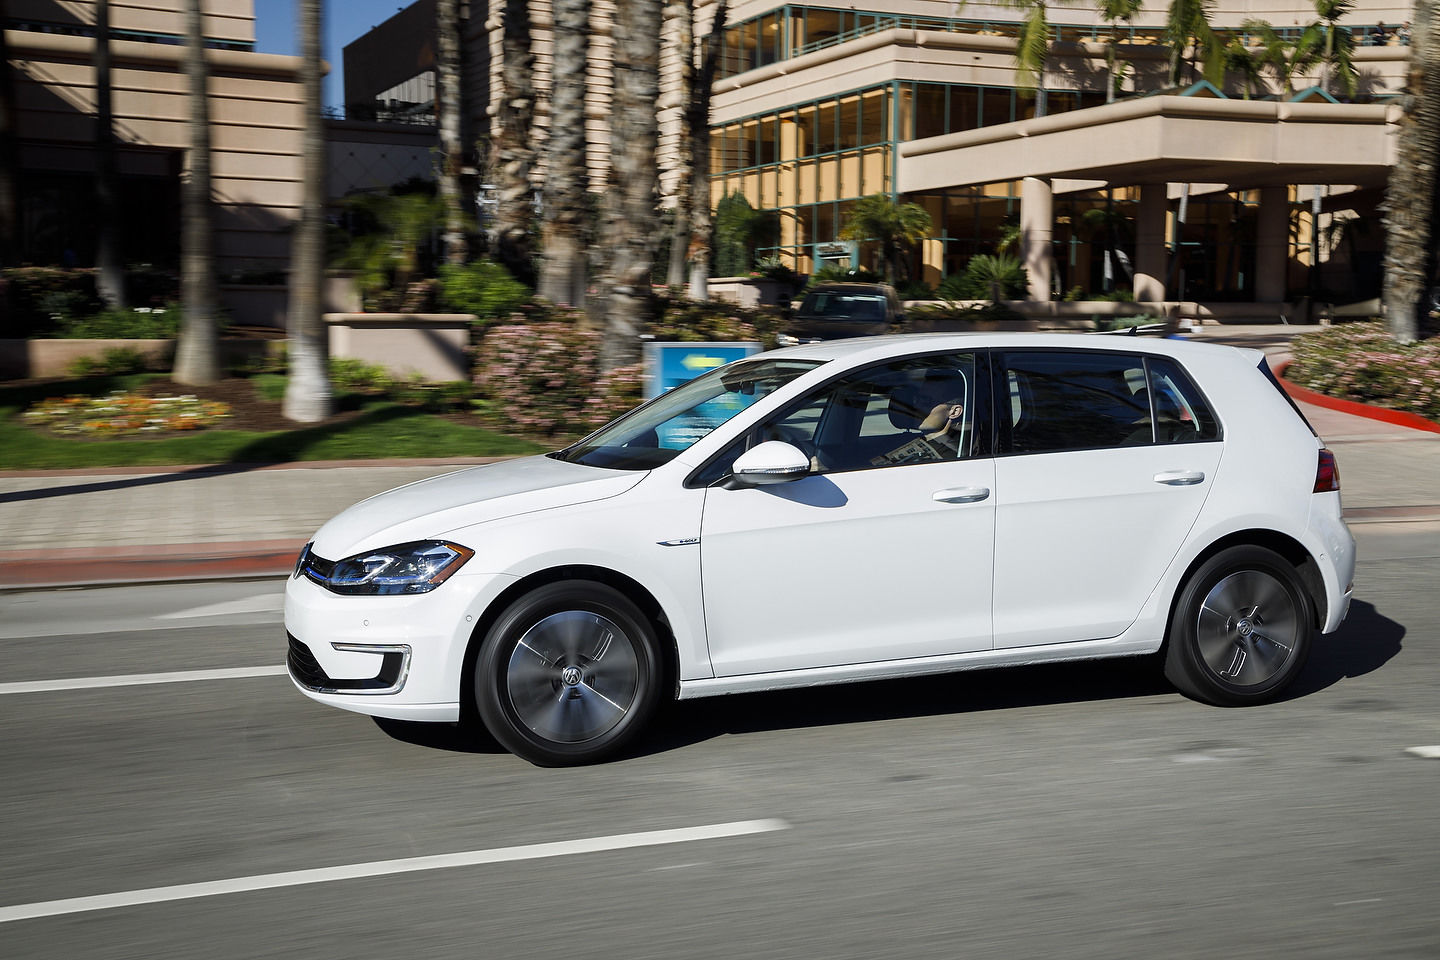 Volkswagen eGolf named vehicle with Best Retained Value among all